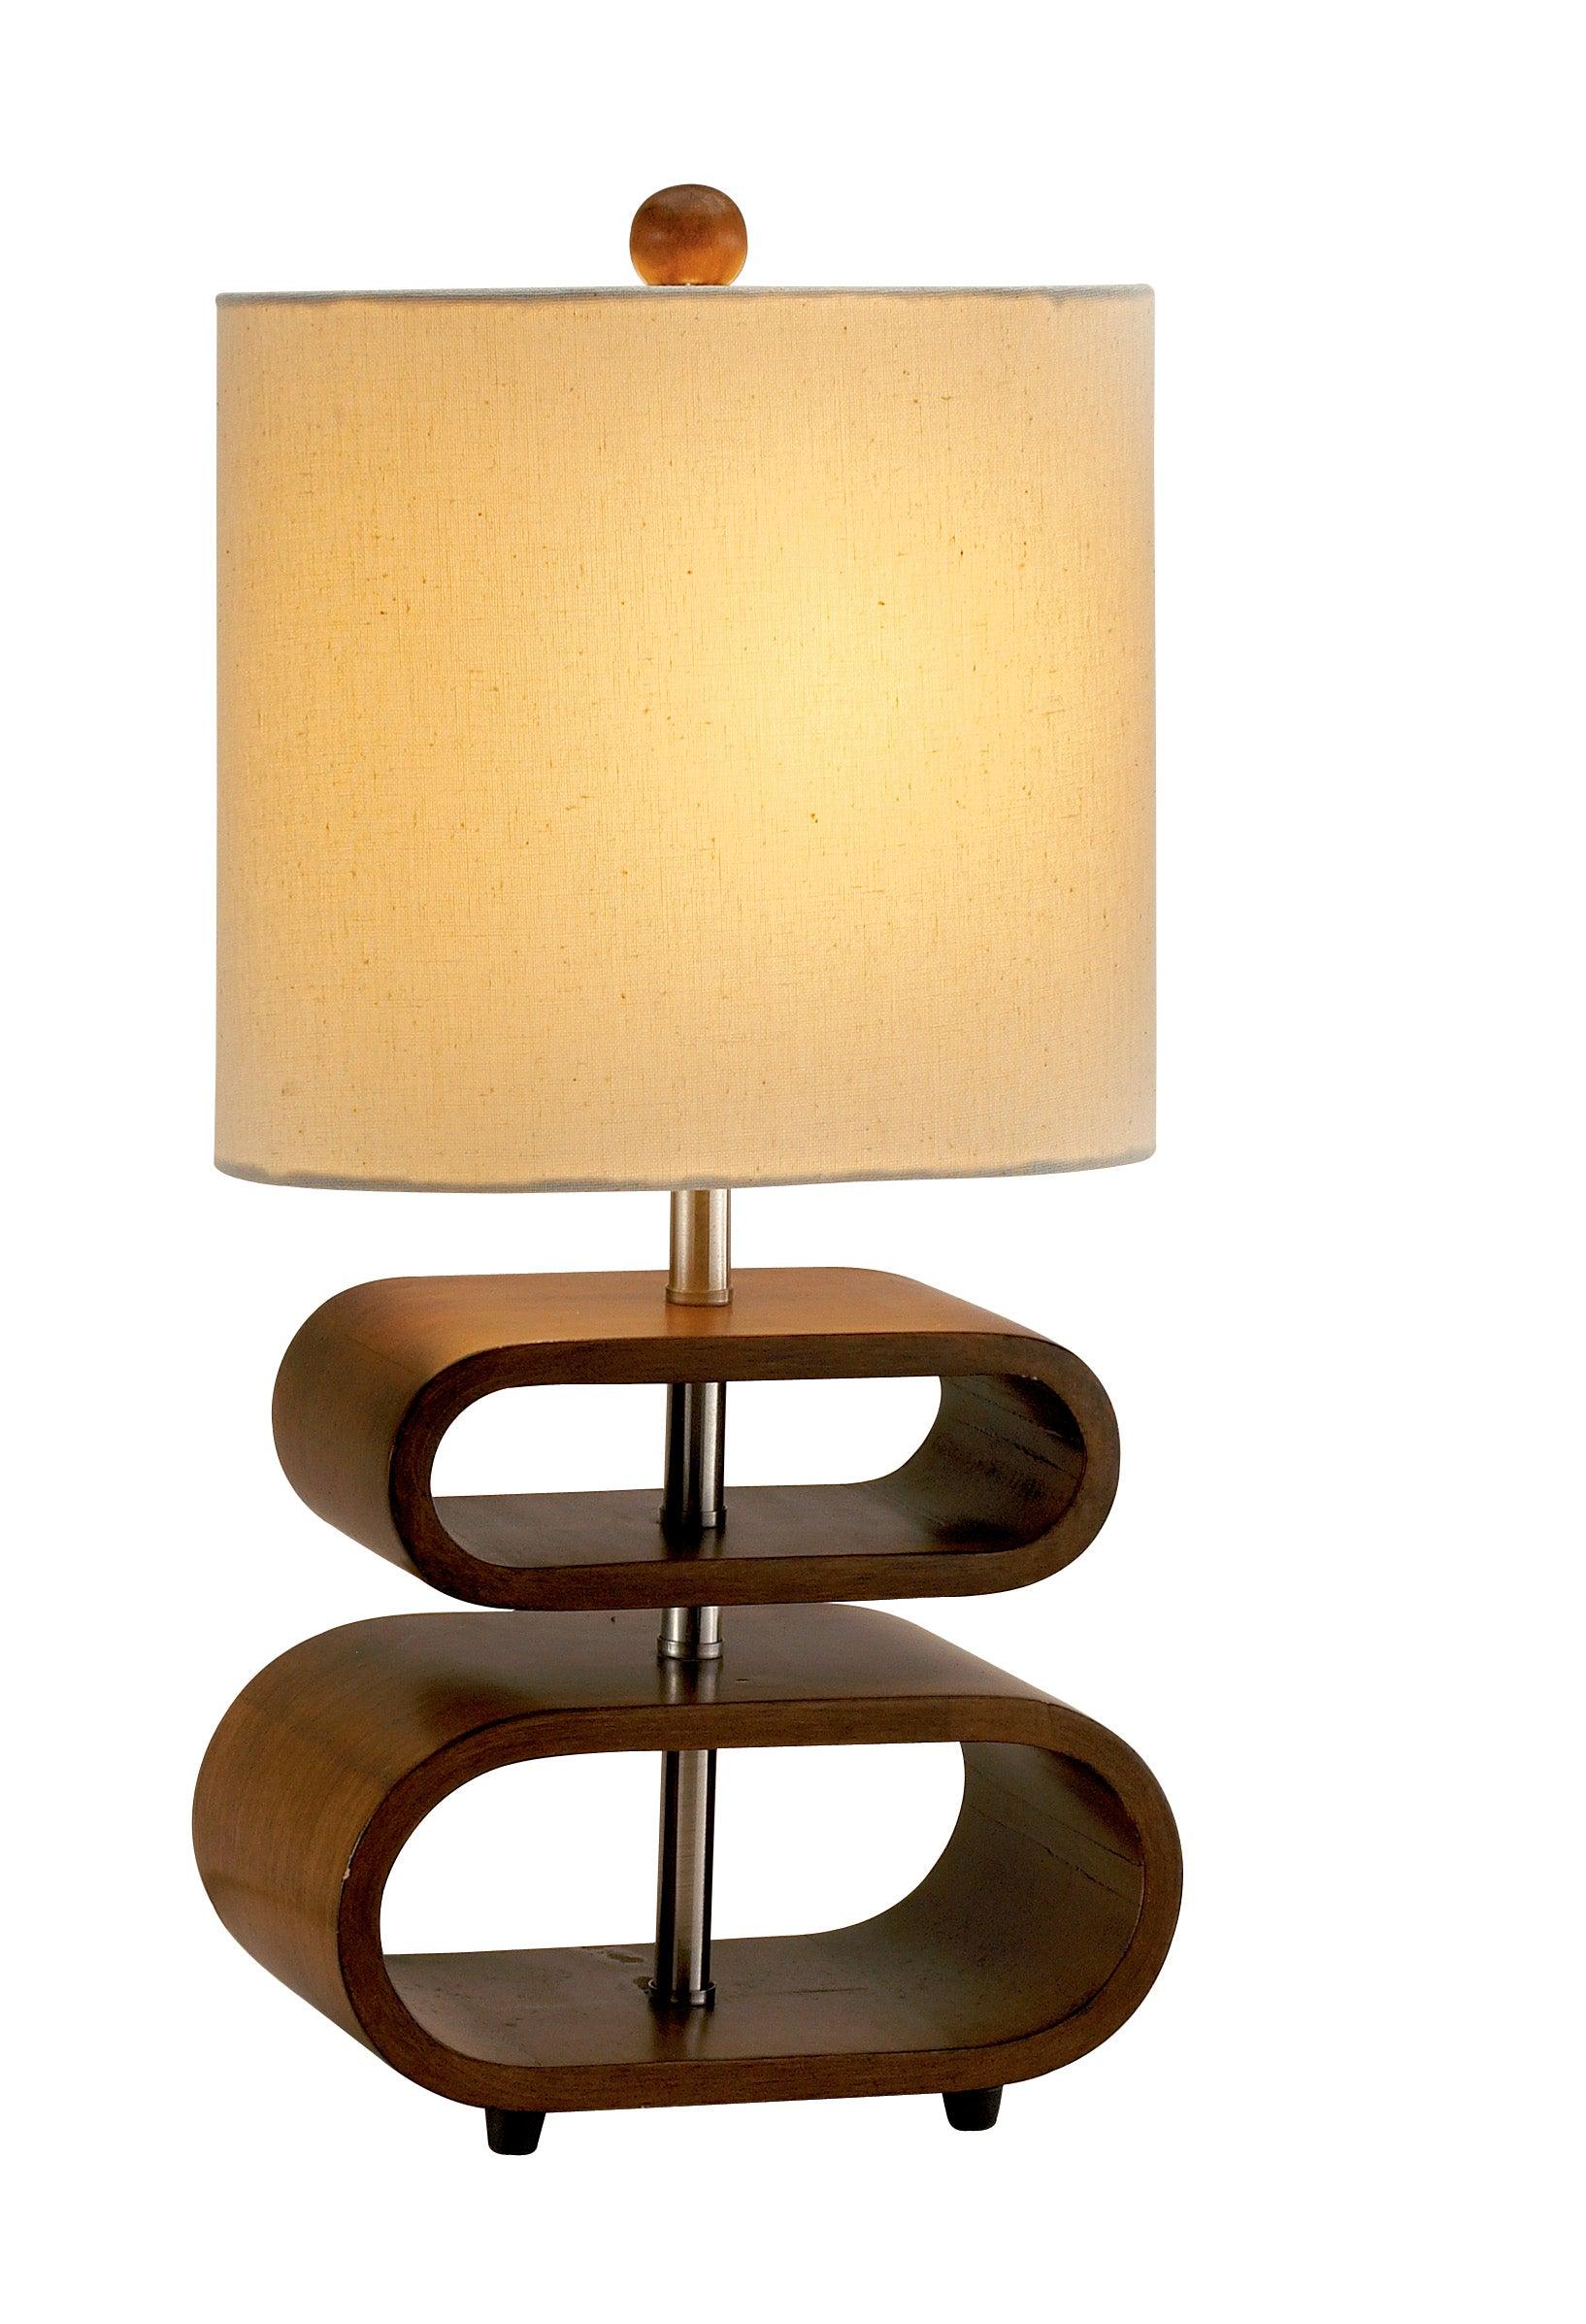 Walnut Wood Finish Stacked Bentwood Ovals with Natural Fabric Oval Shade Table Lamp - AFS